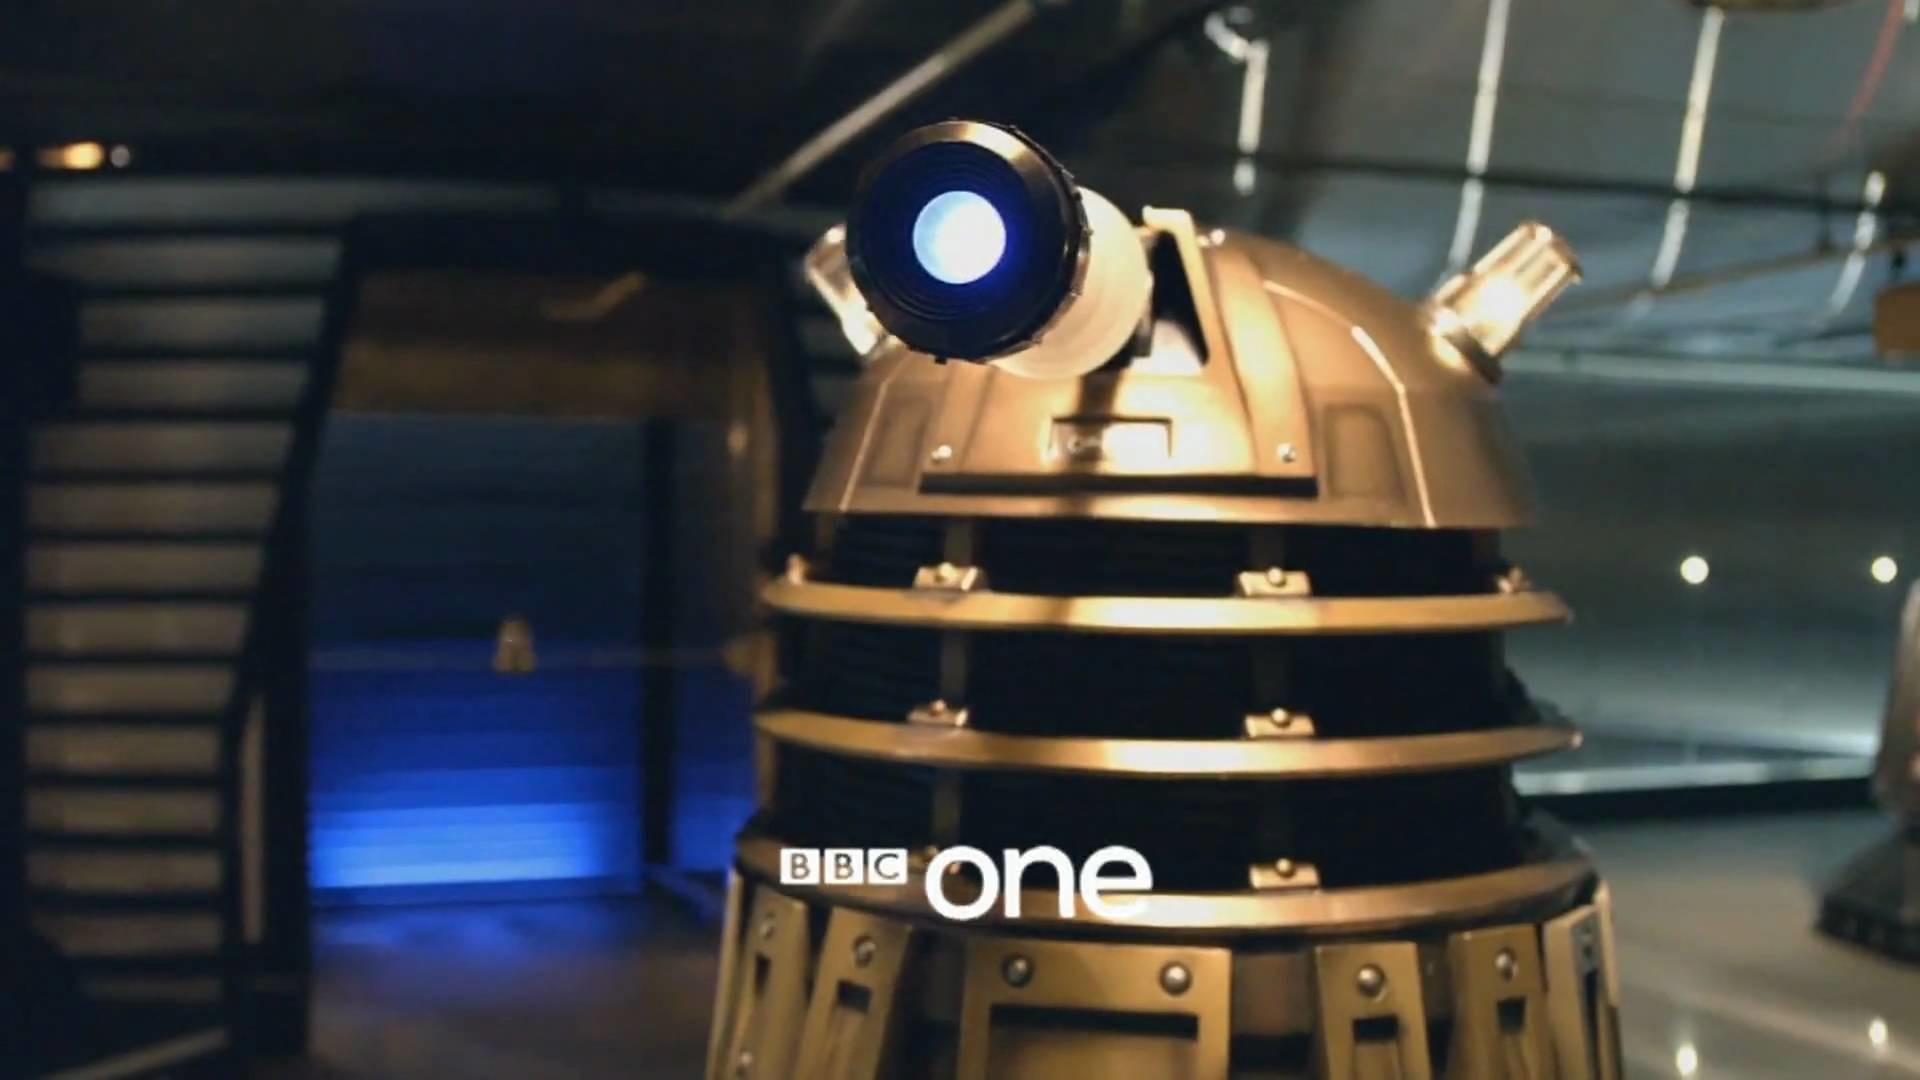 1920x1080 Doctor Who: Victory Of The Daleks BBC One TV Trailer #2